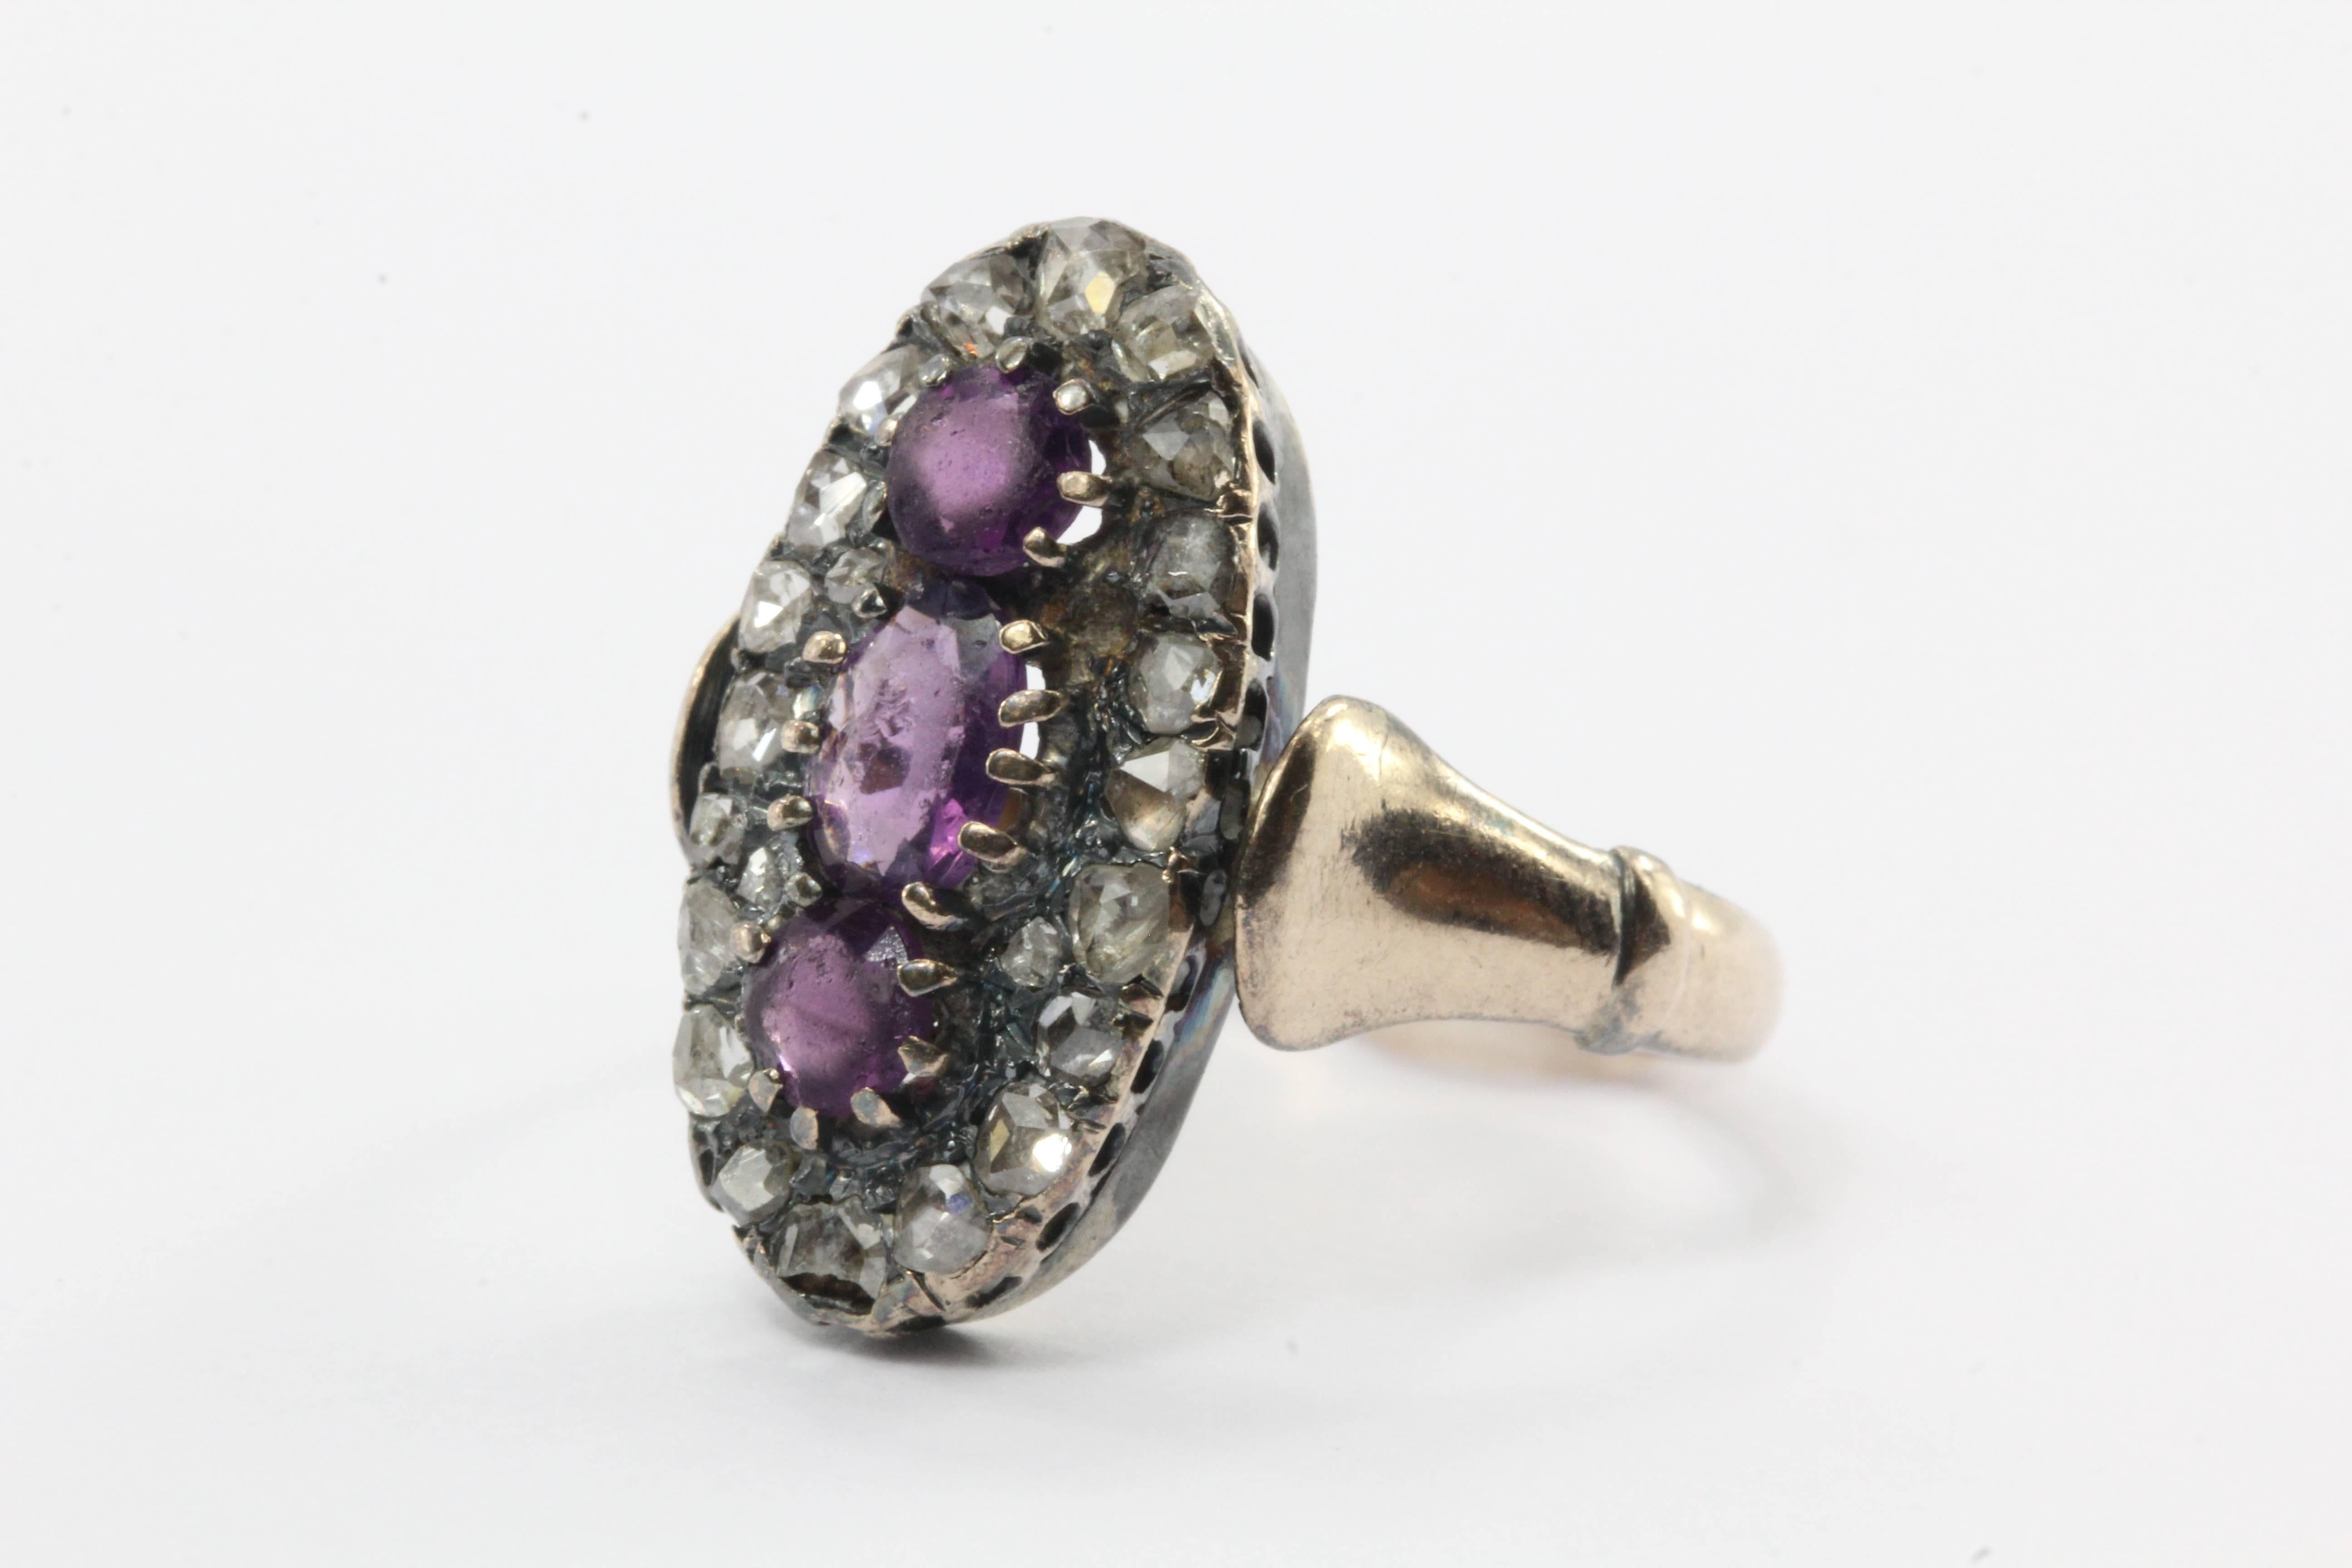 Antique 10K Gold Georgian Rose Cut Diamond Purple Paste Ring. The ring is made of 10K yellow gold but the stones are set in sterling silver. The piece is set with 20 genuine rose cut diamonds. One of the diamonds is cracked. The three purple stones